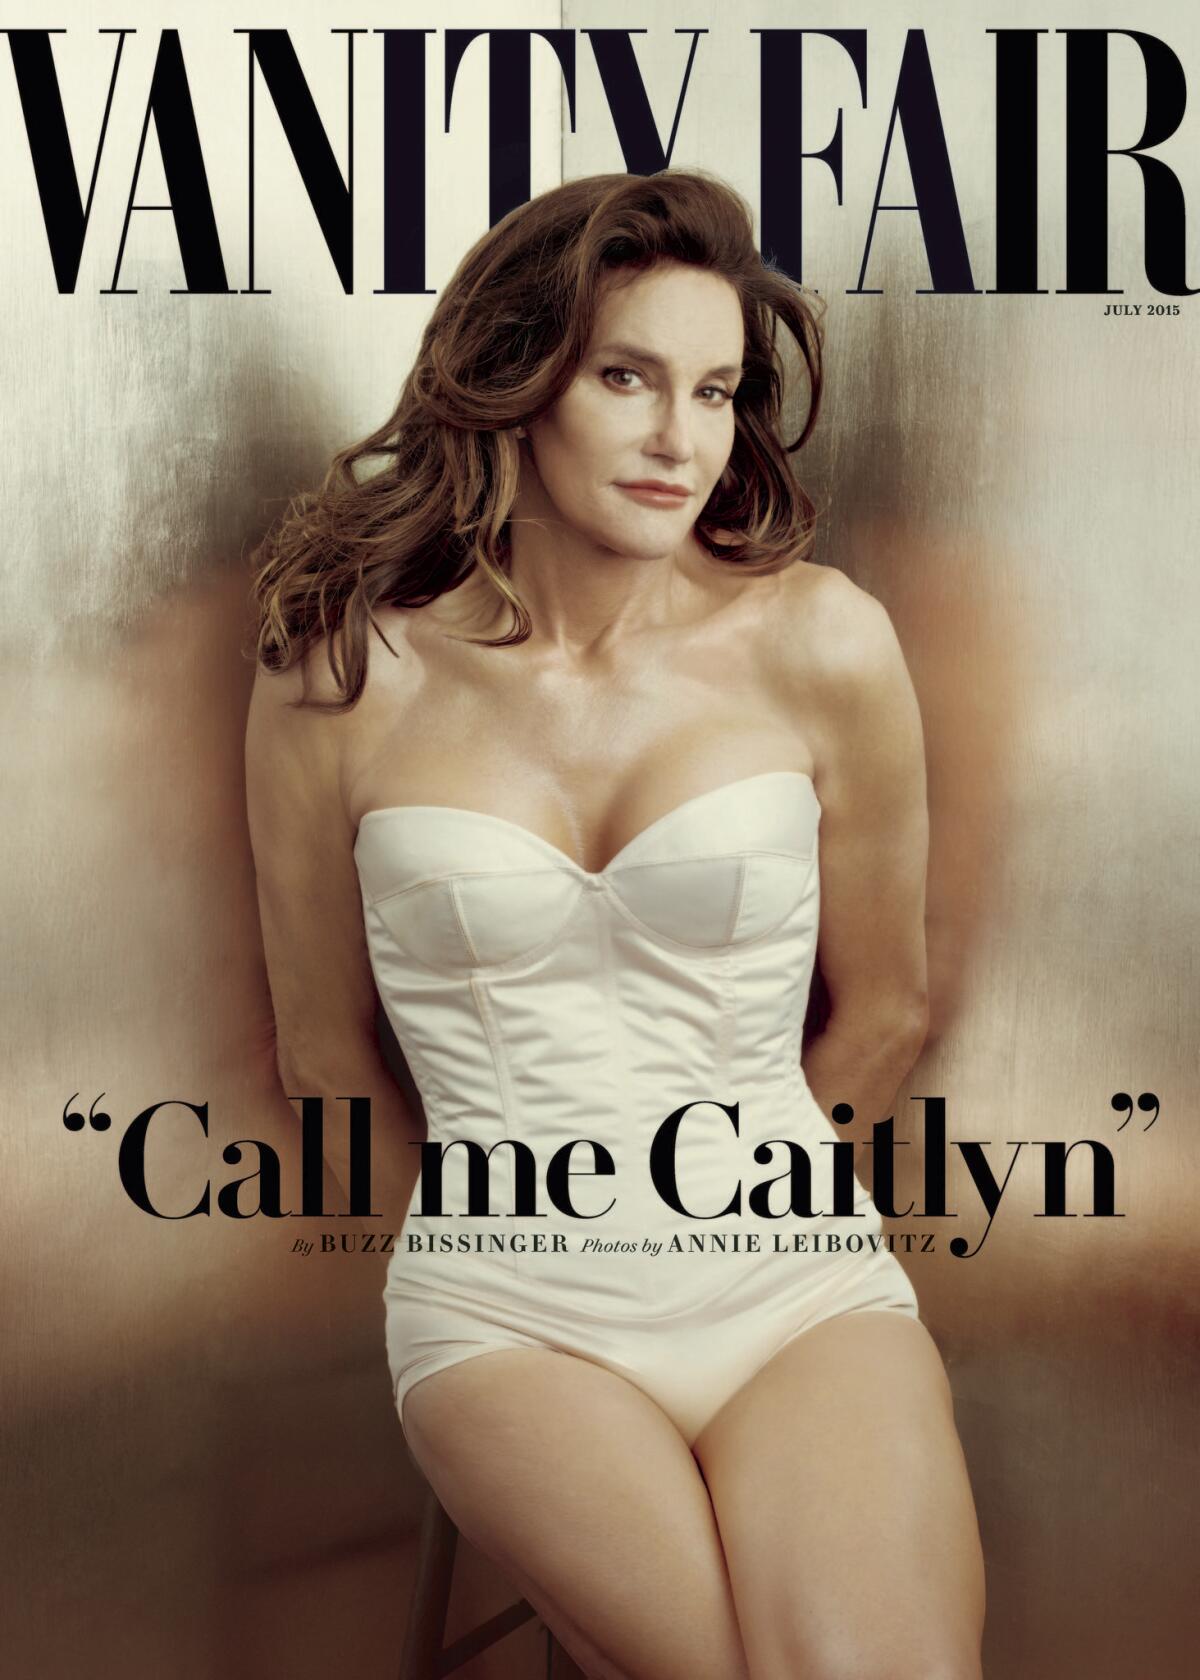 Annie Leibovitz's portrait of Caitlyn Jenner, the Olympian and transgender celebrity formerly known as Bruce Jenner, on the cover of Vanity Fair.